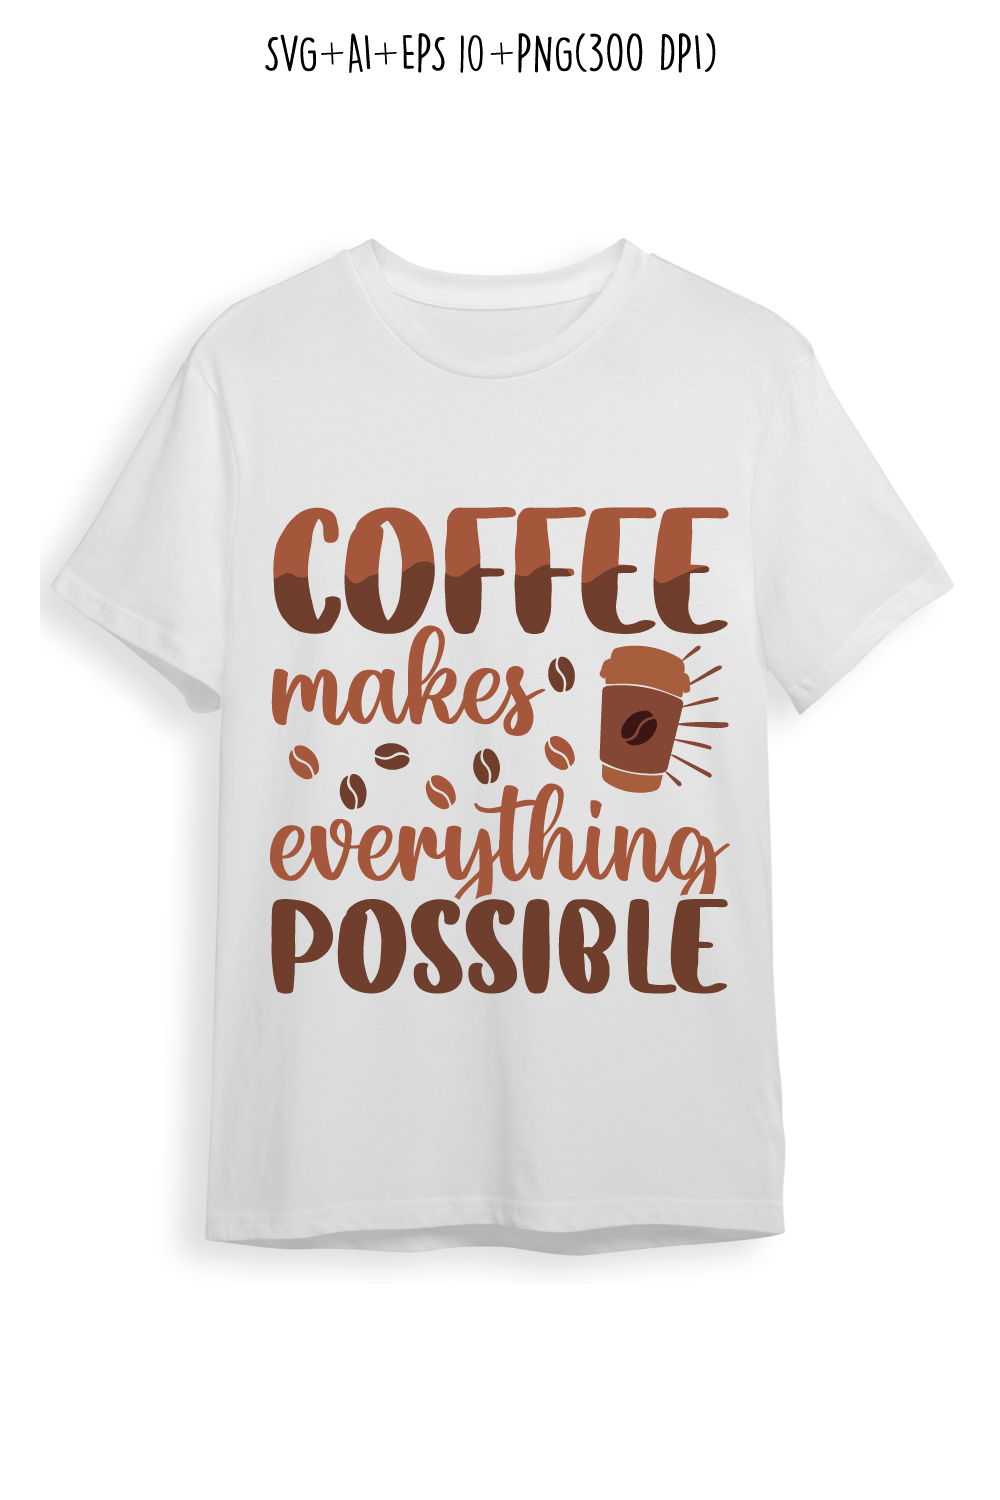 Coffee makes everything possible typography design for t-shirts, print, templates, logos, mug pinterest preview image.